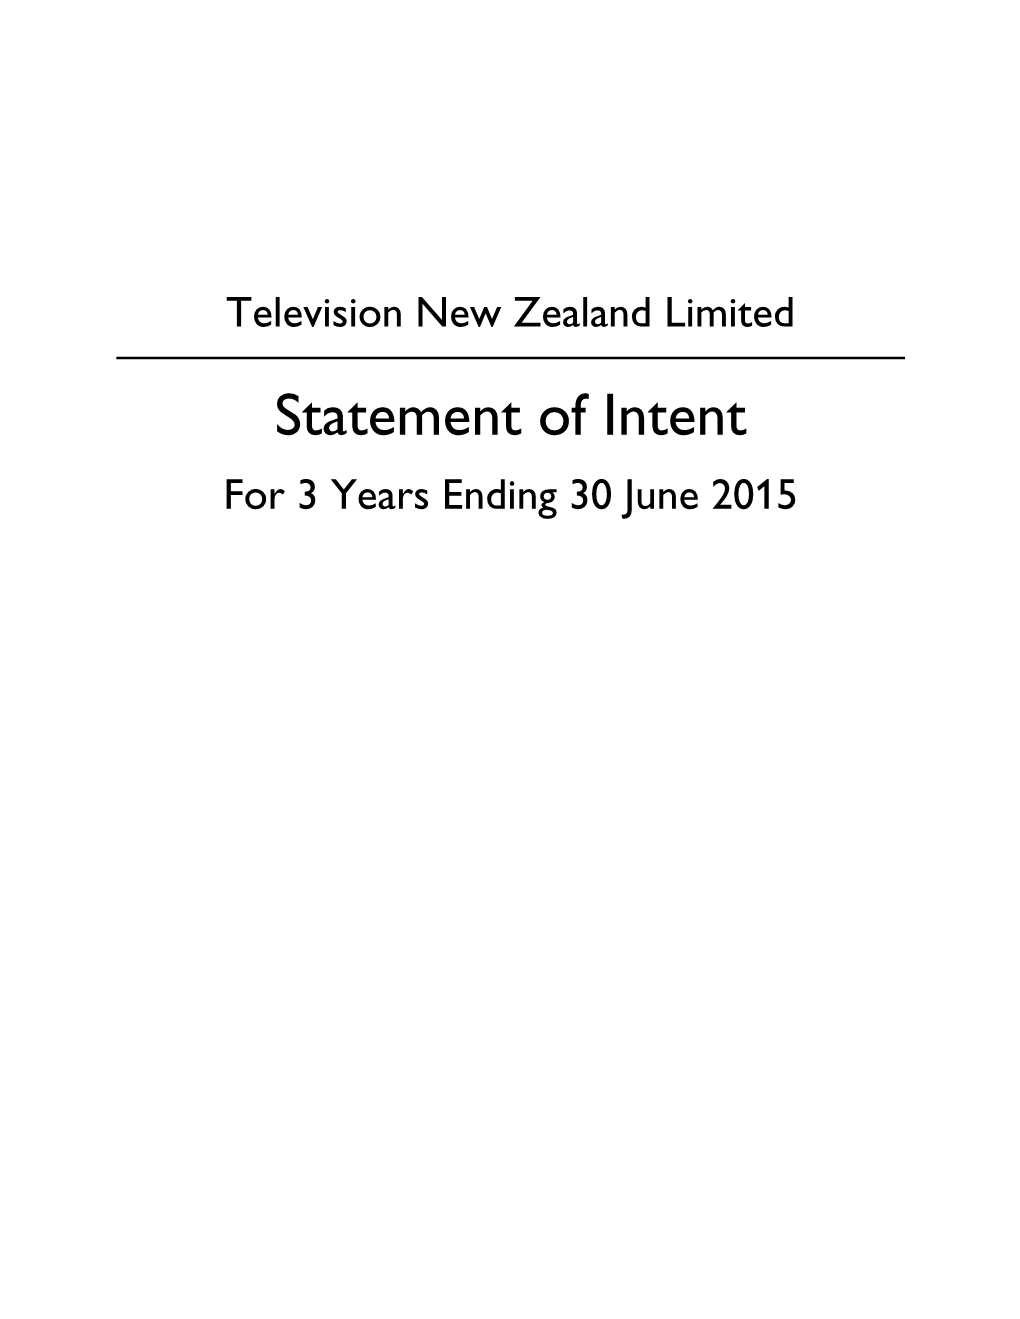 Statement of Intent for 3 Years Ending 30 June 2015